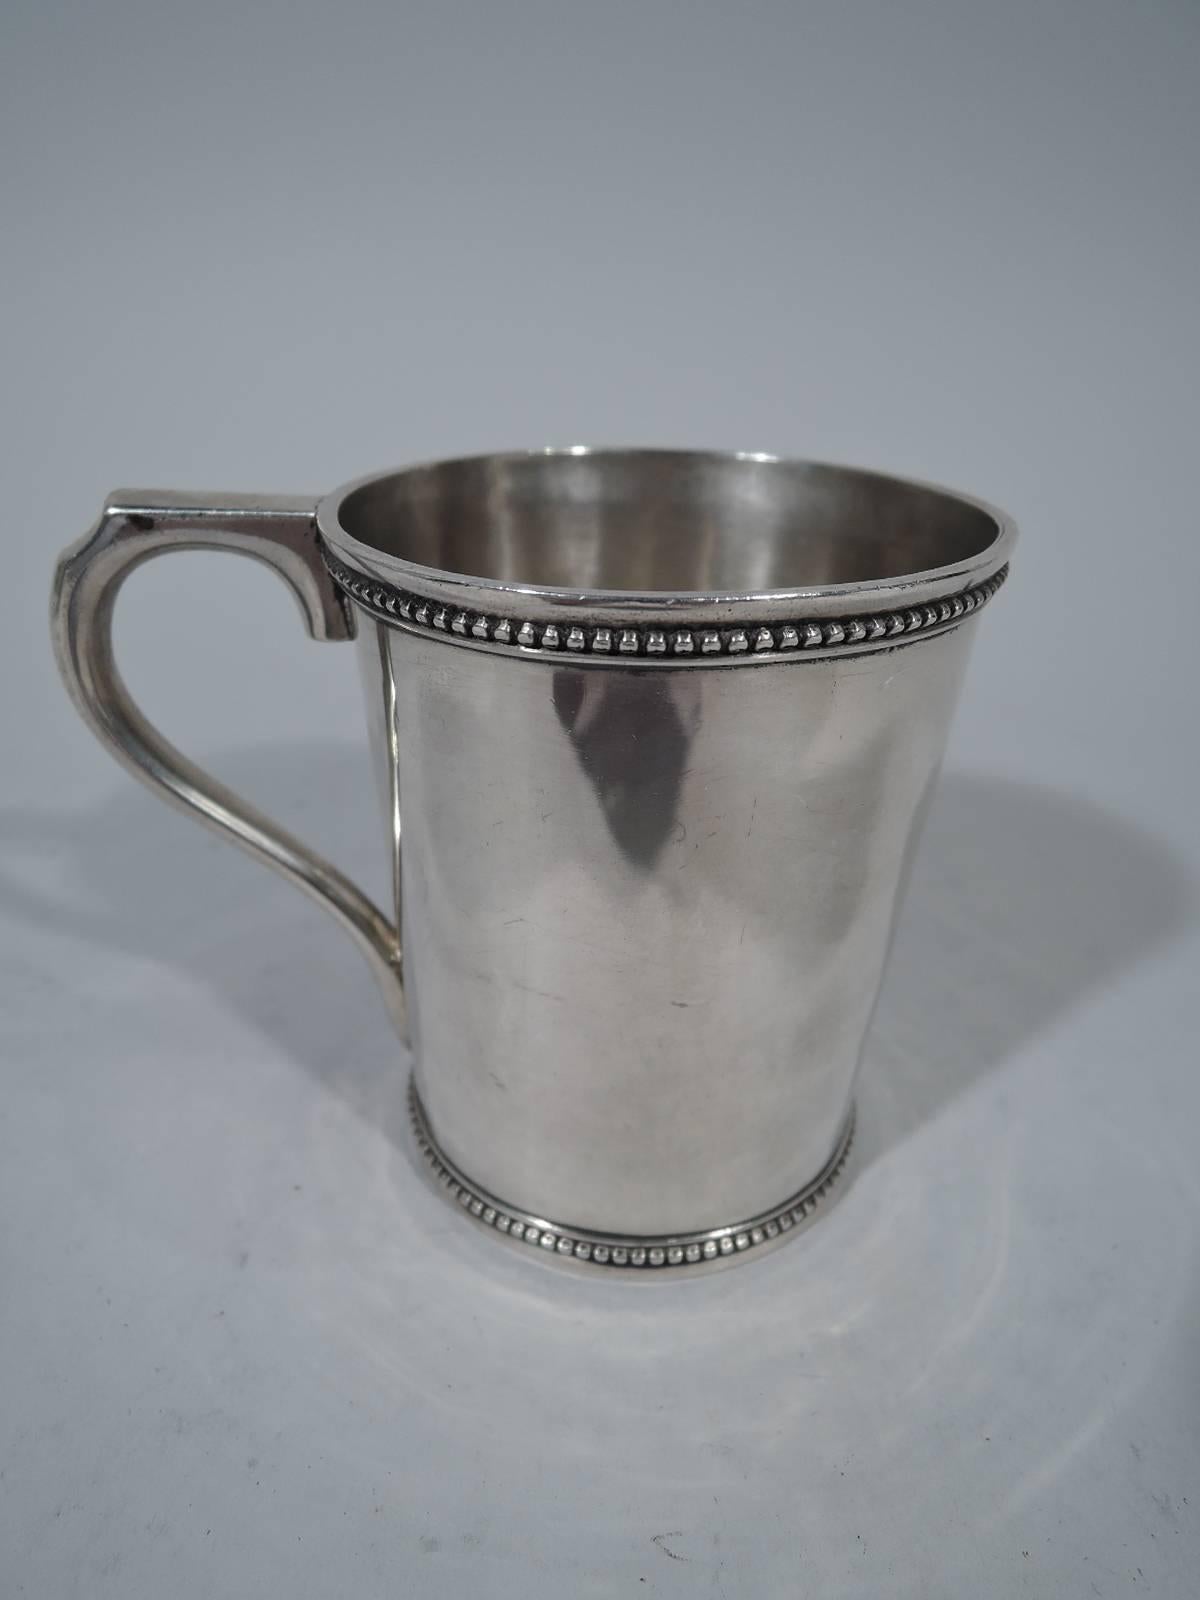 American Classical Antique Coin Silver Baby Cup by Newell Harding of Boston